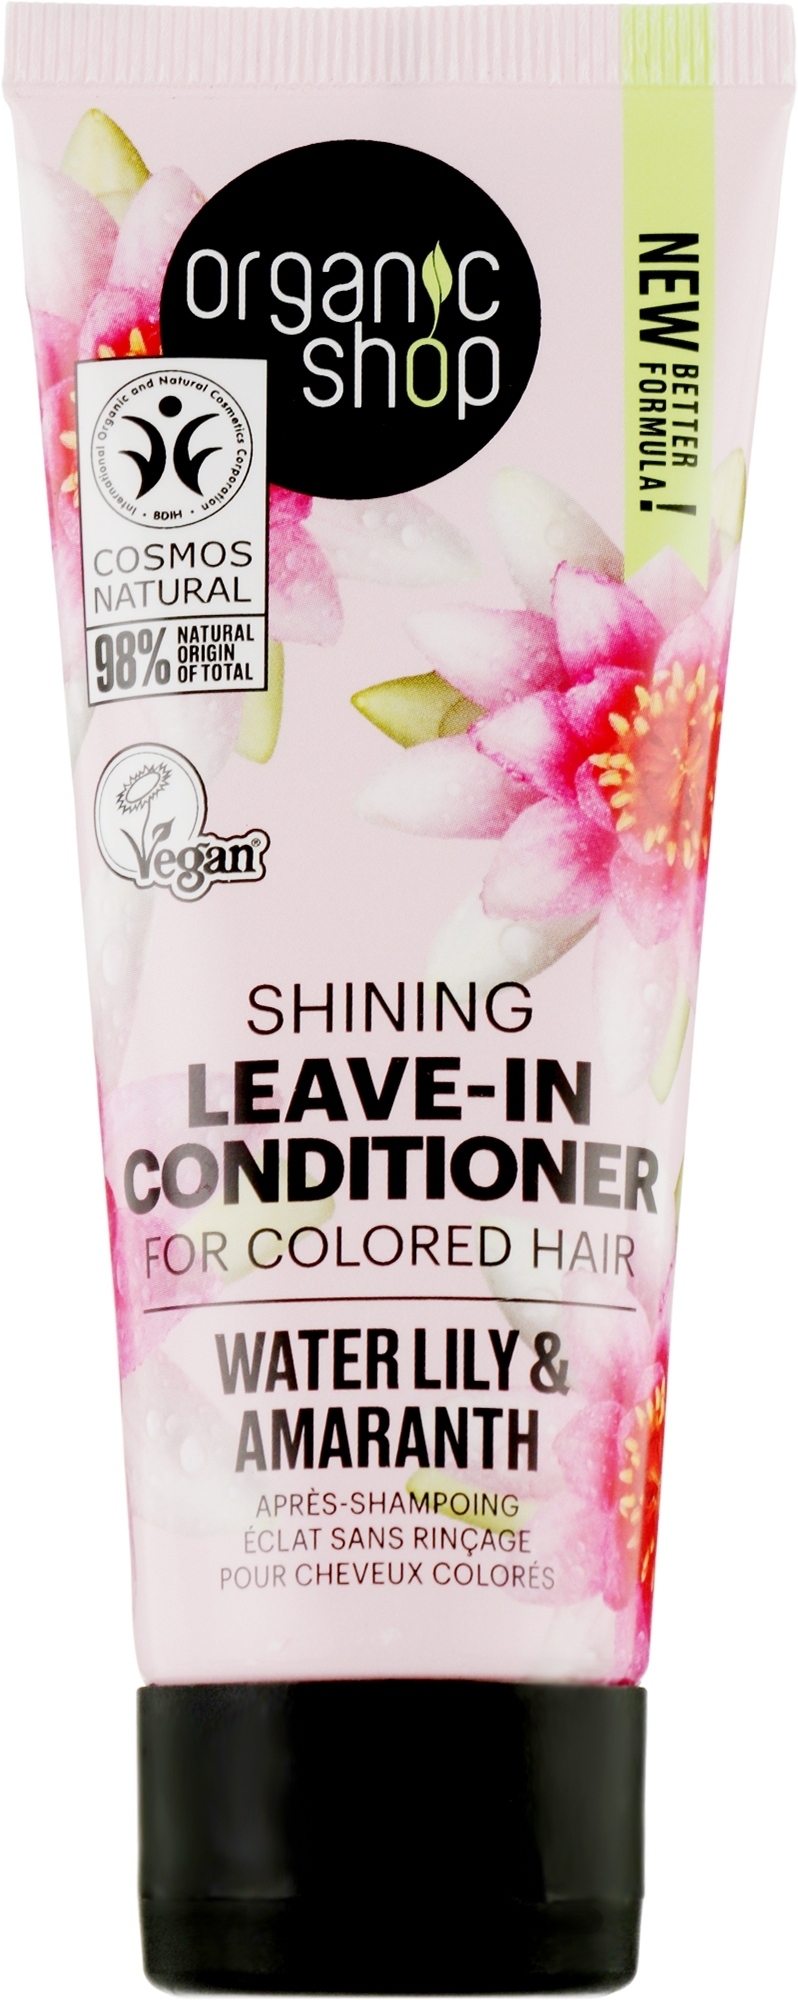 Leave-In Conditioner "Water Lily & Amaranth" - Organic Shop Leave-In Conditioner — photo 75 ml